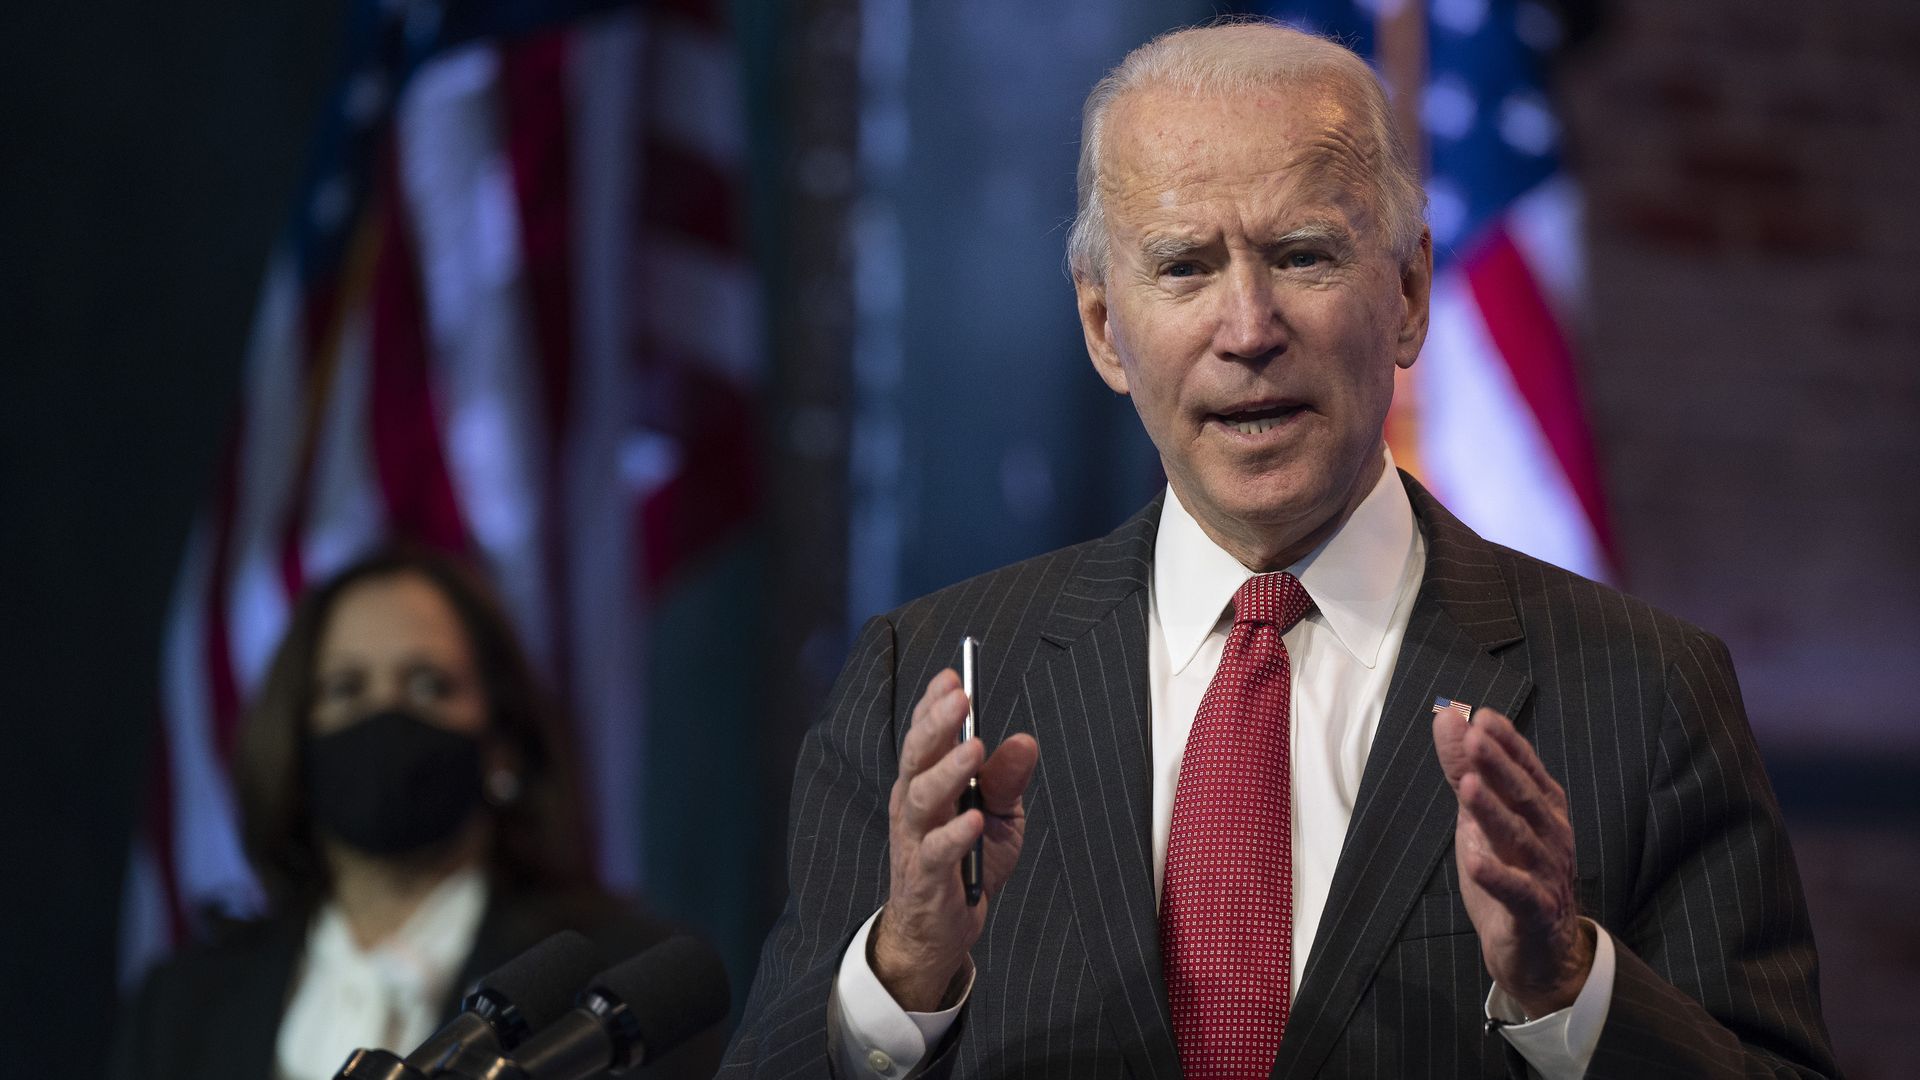 President-elect Joe Biden uses his hands for emphasis as he makes remarks